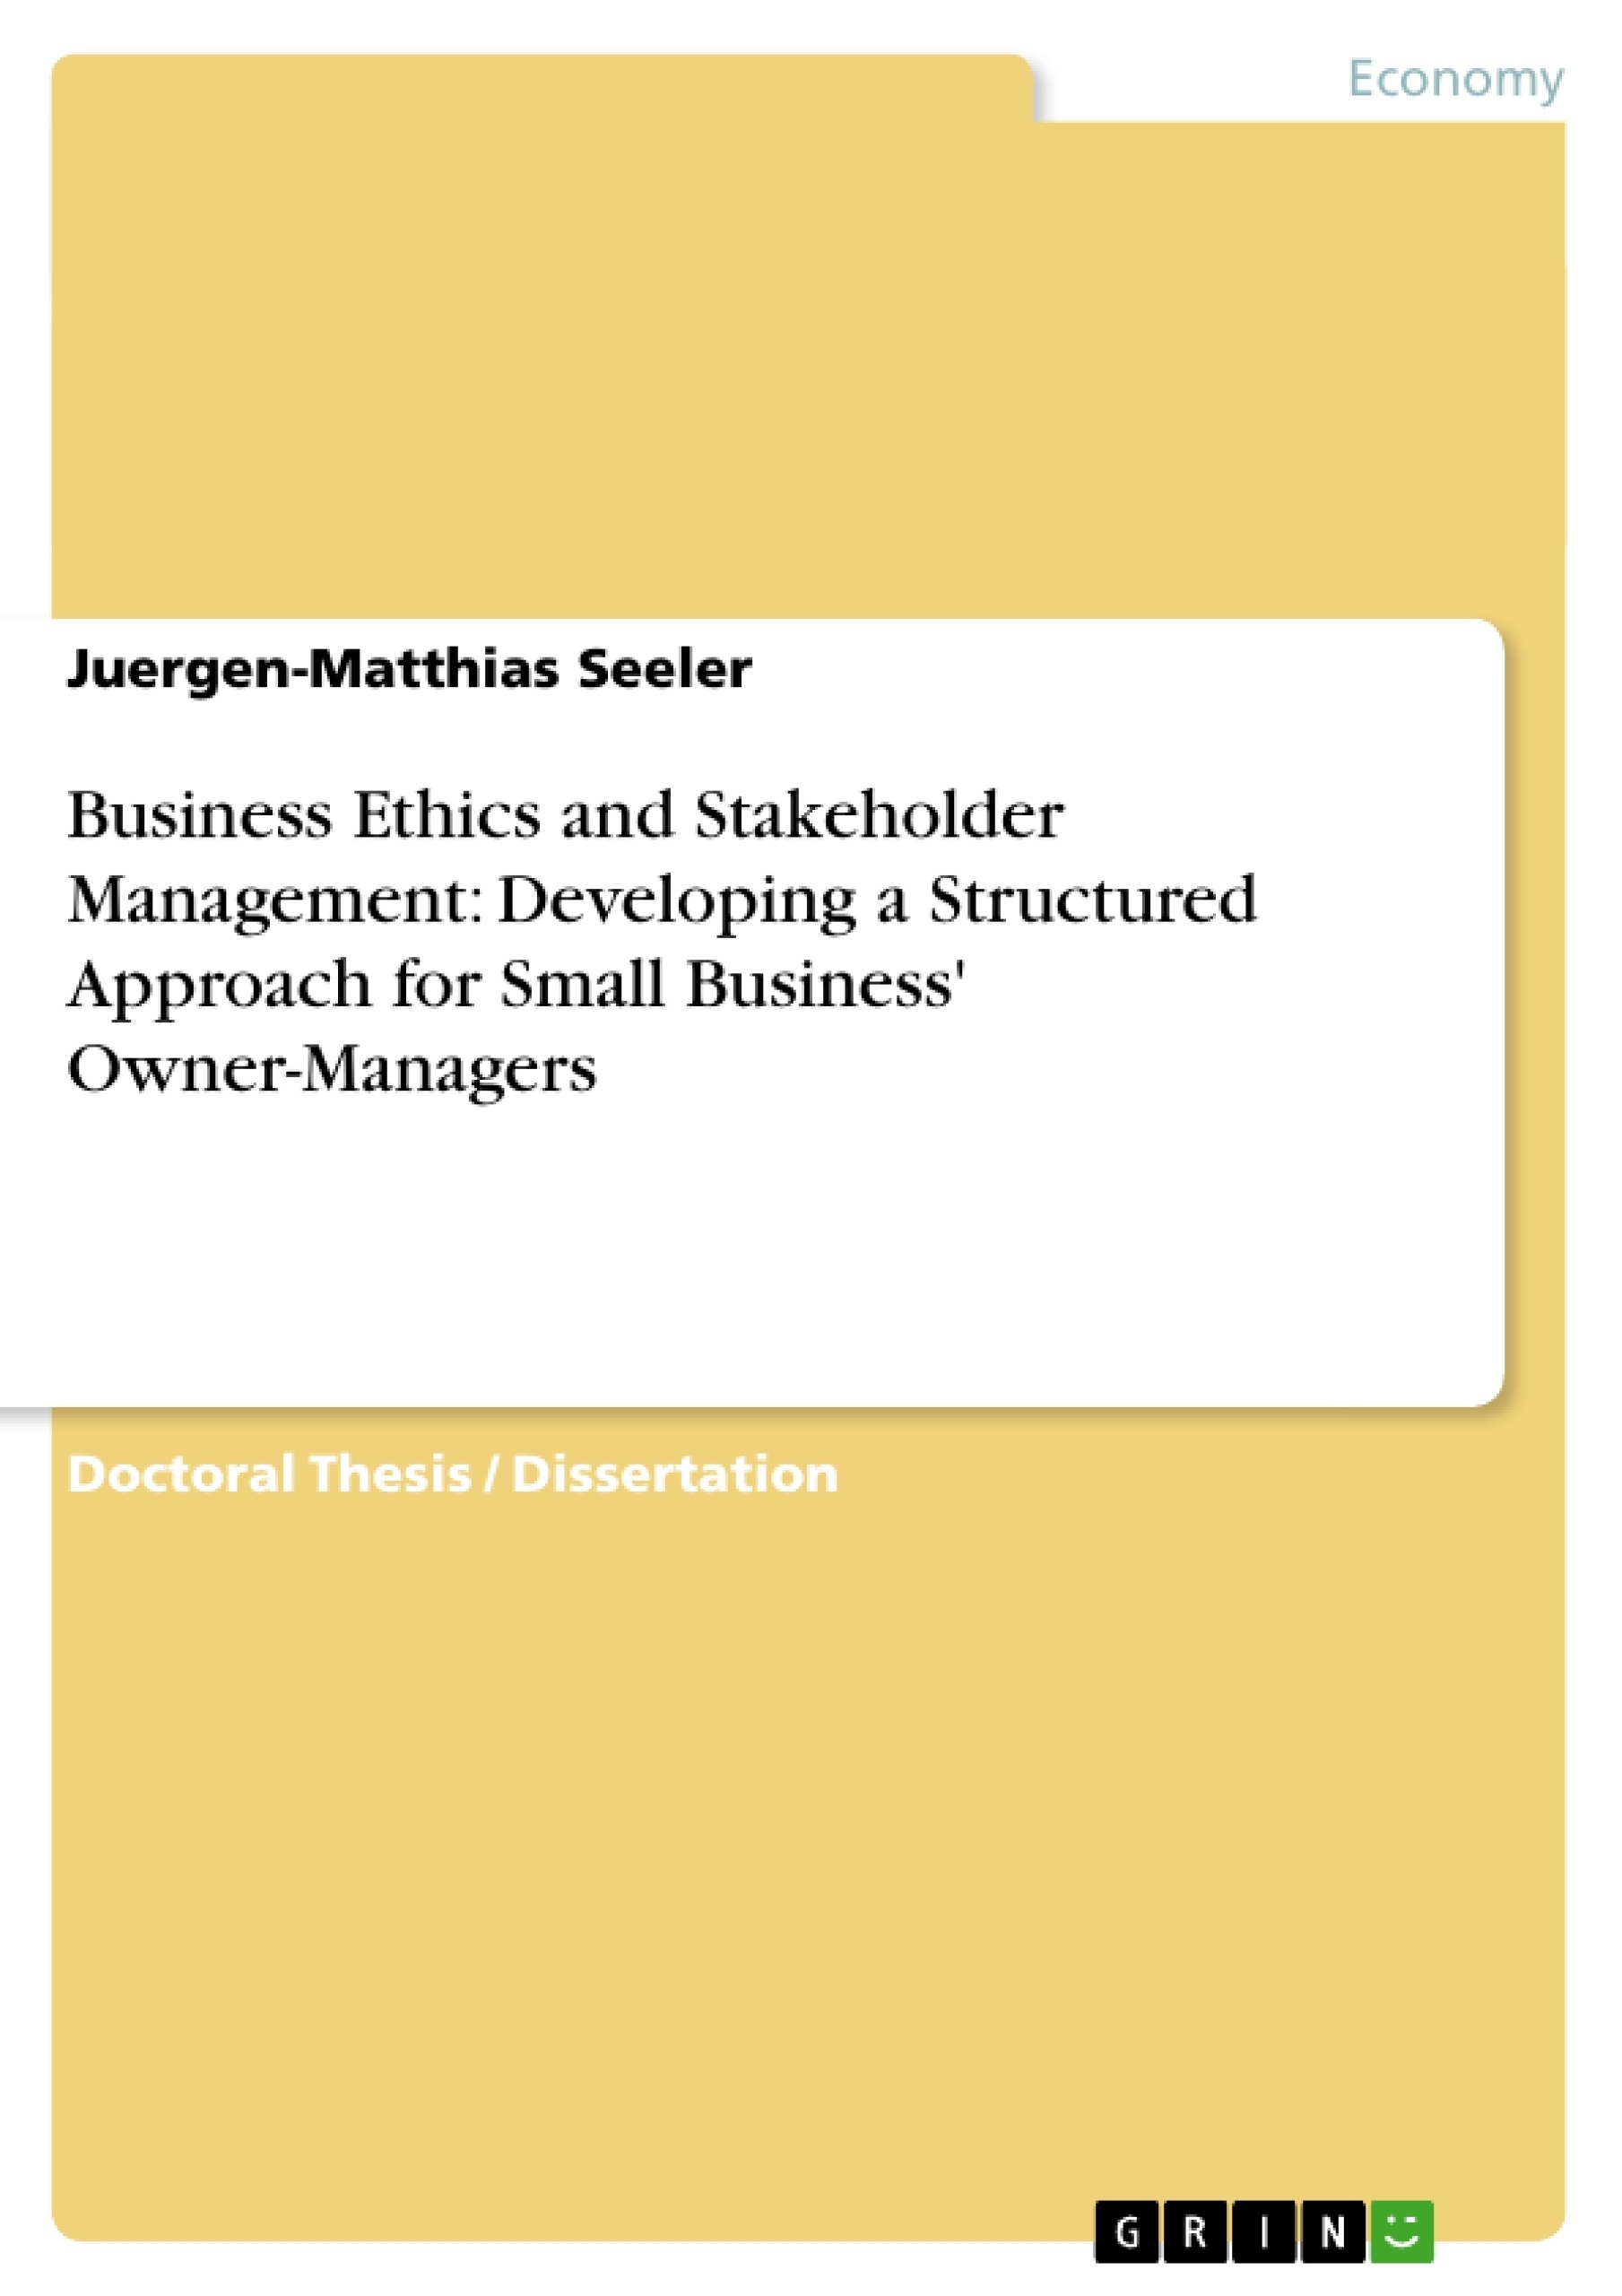 Titel: Business Ethics and Stakeholder Management: Developing a Structured Approach for Small Business' Owner-Managers